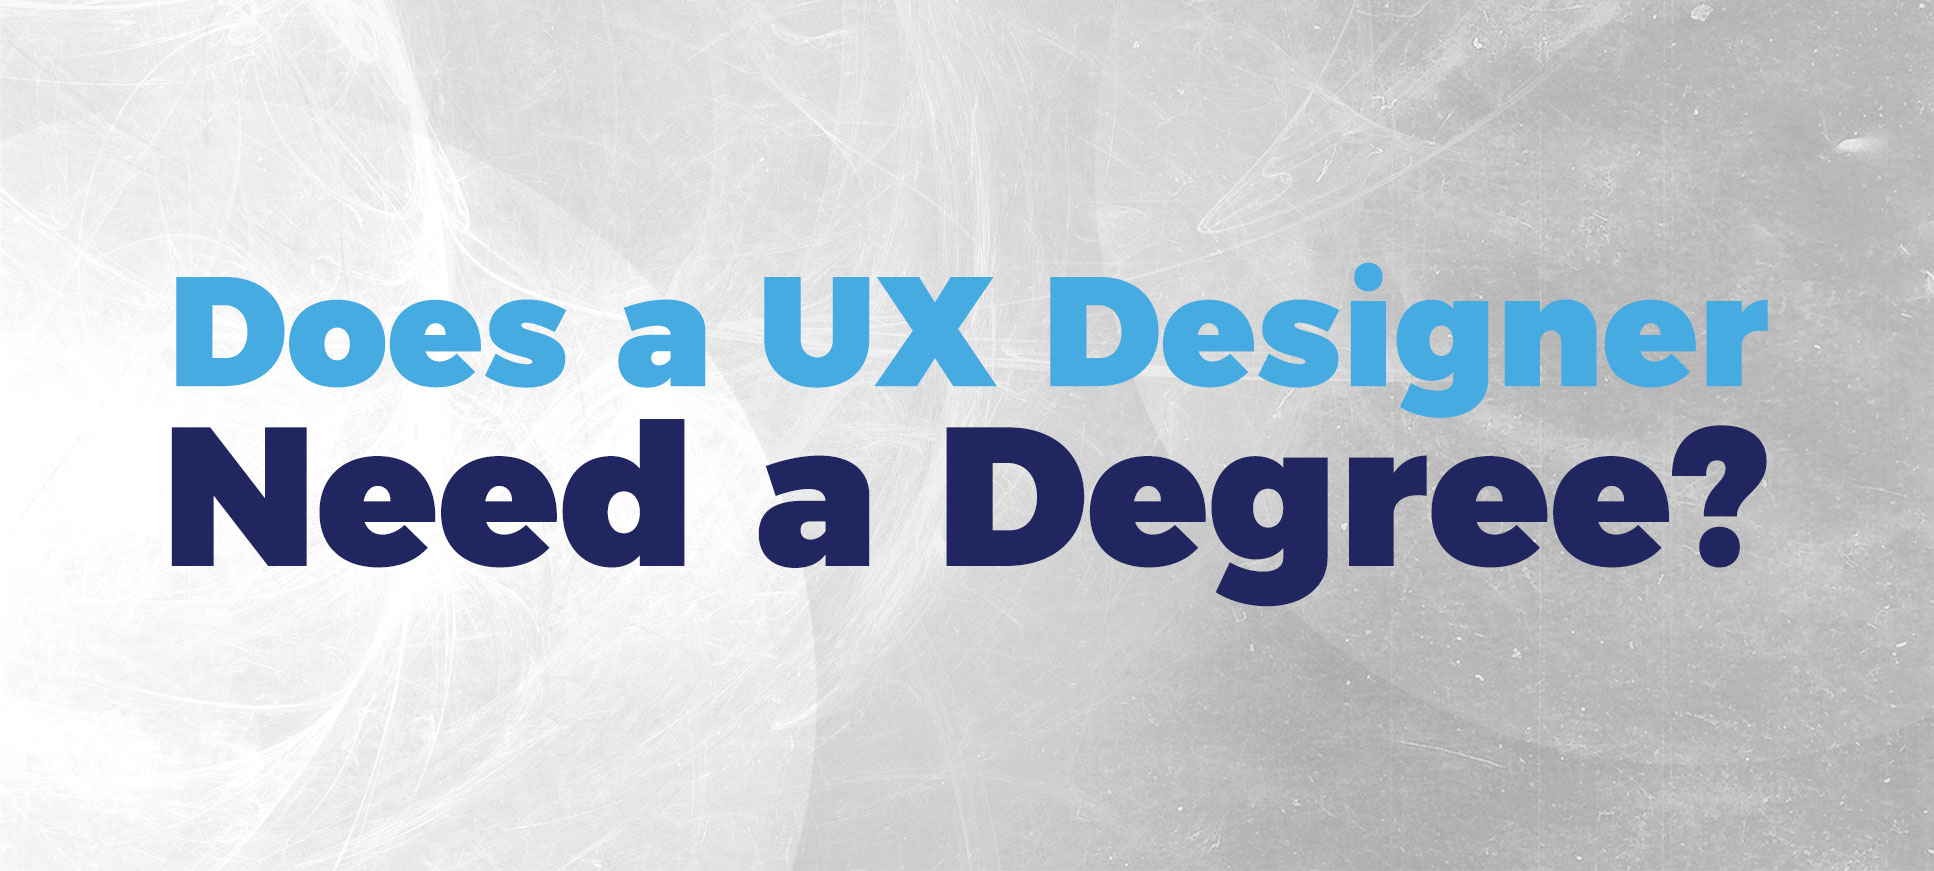 Does a UX Designer Need a Degree